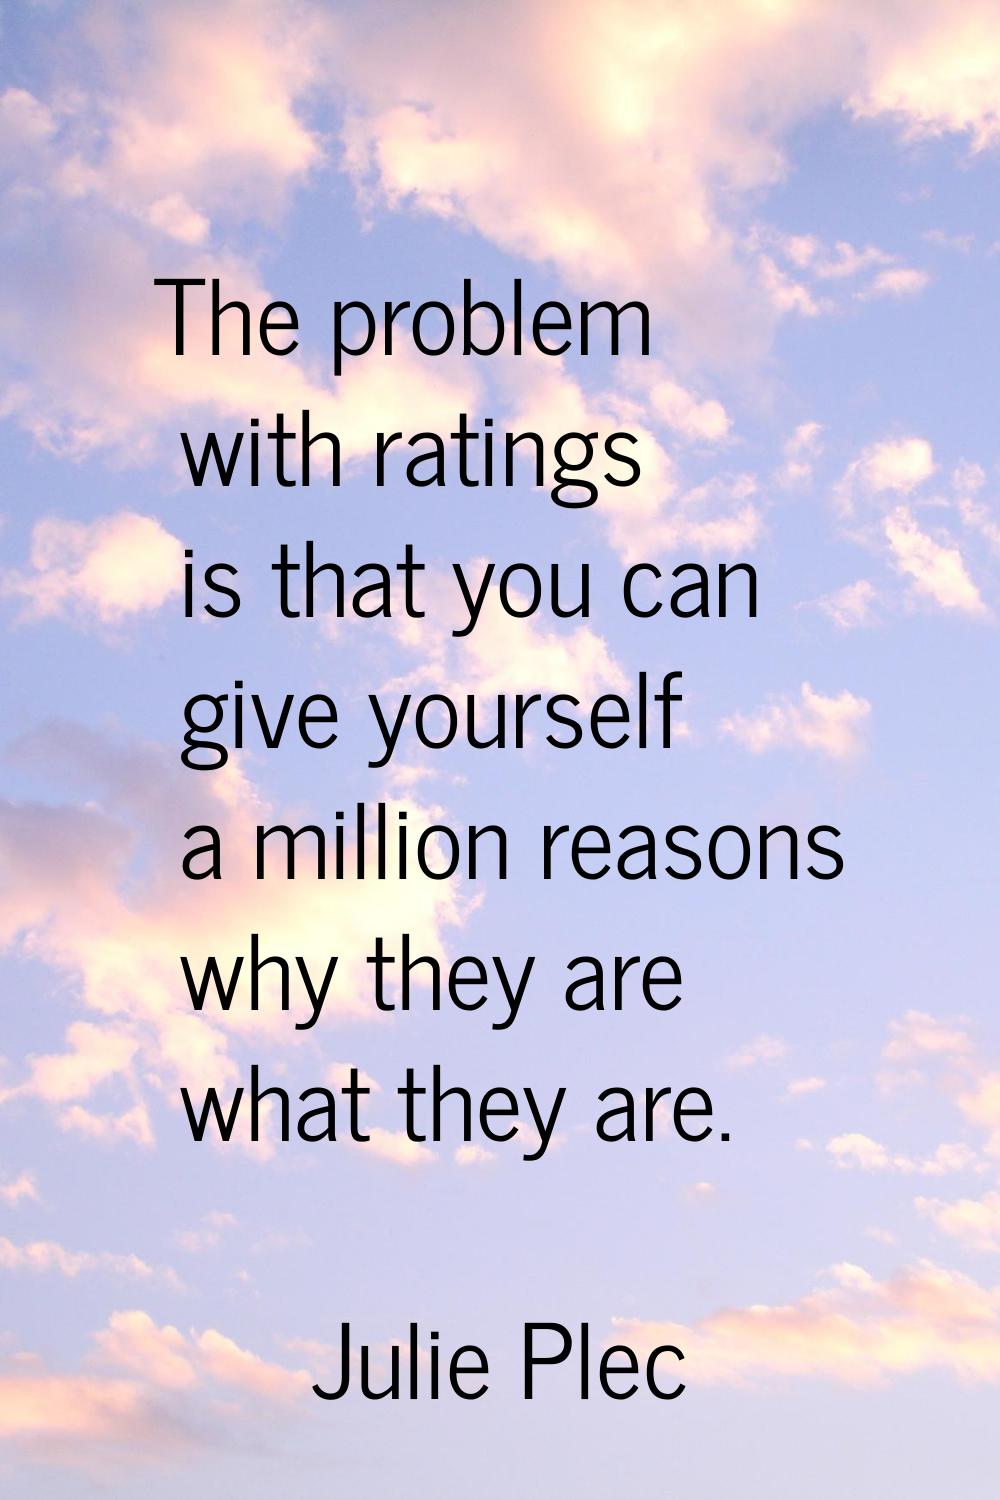 The problem with ratings is that you can give yourself a million reasons why they are what they are